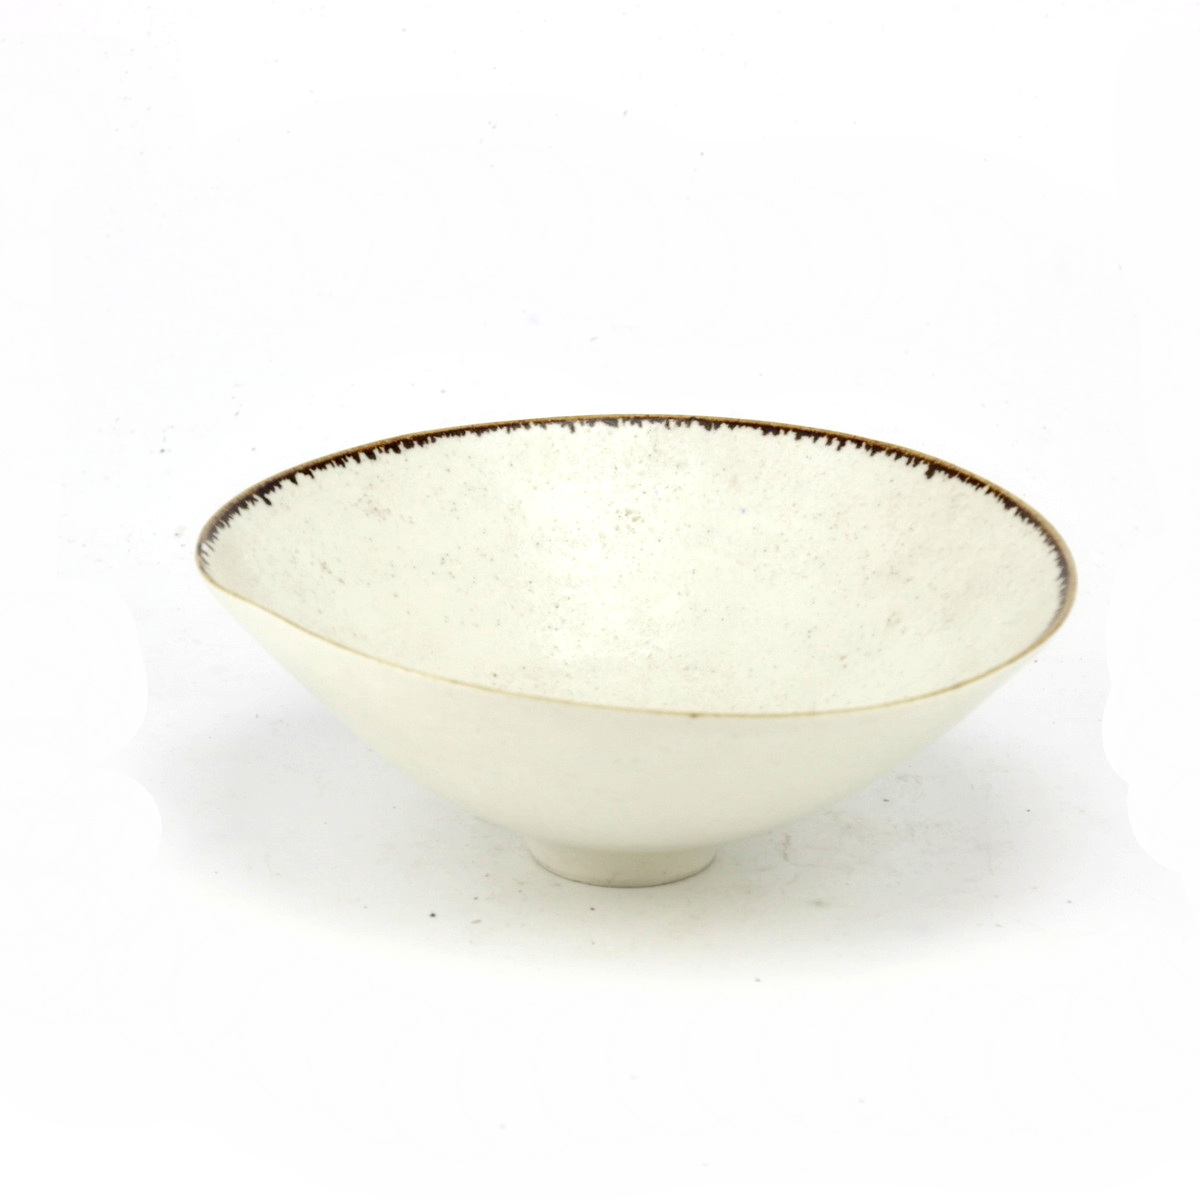 Small Porcelain Footed Bowl SOLD